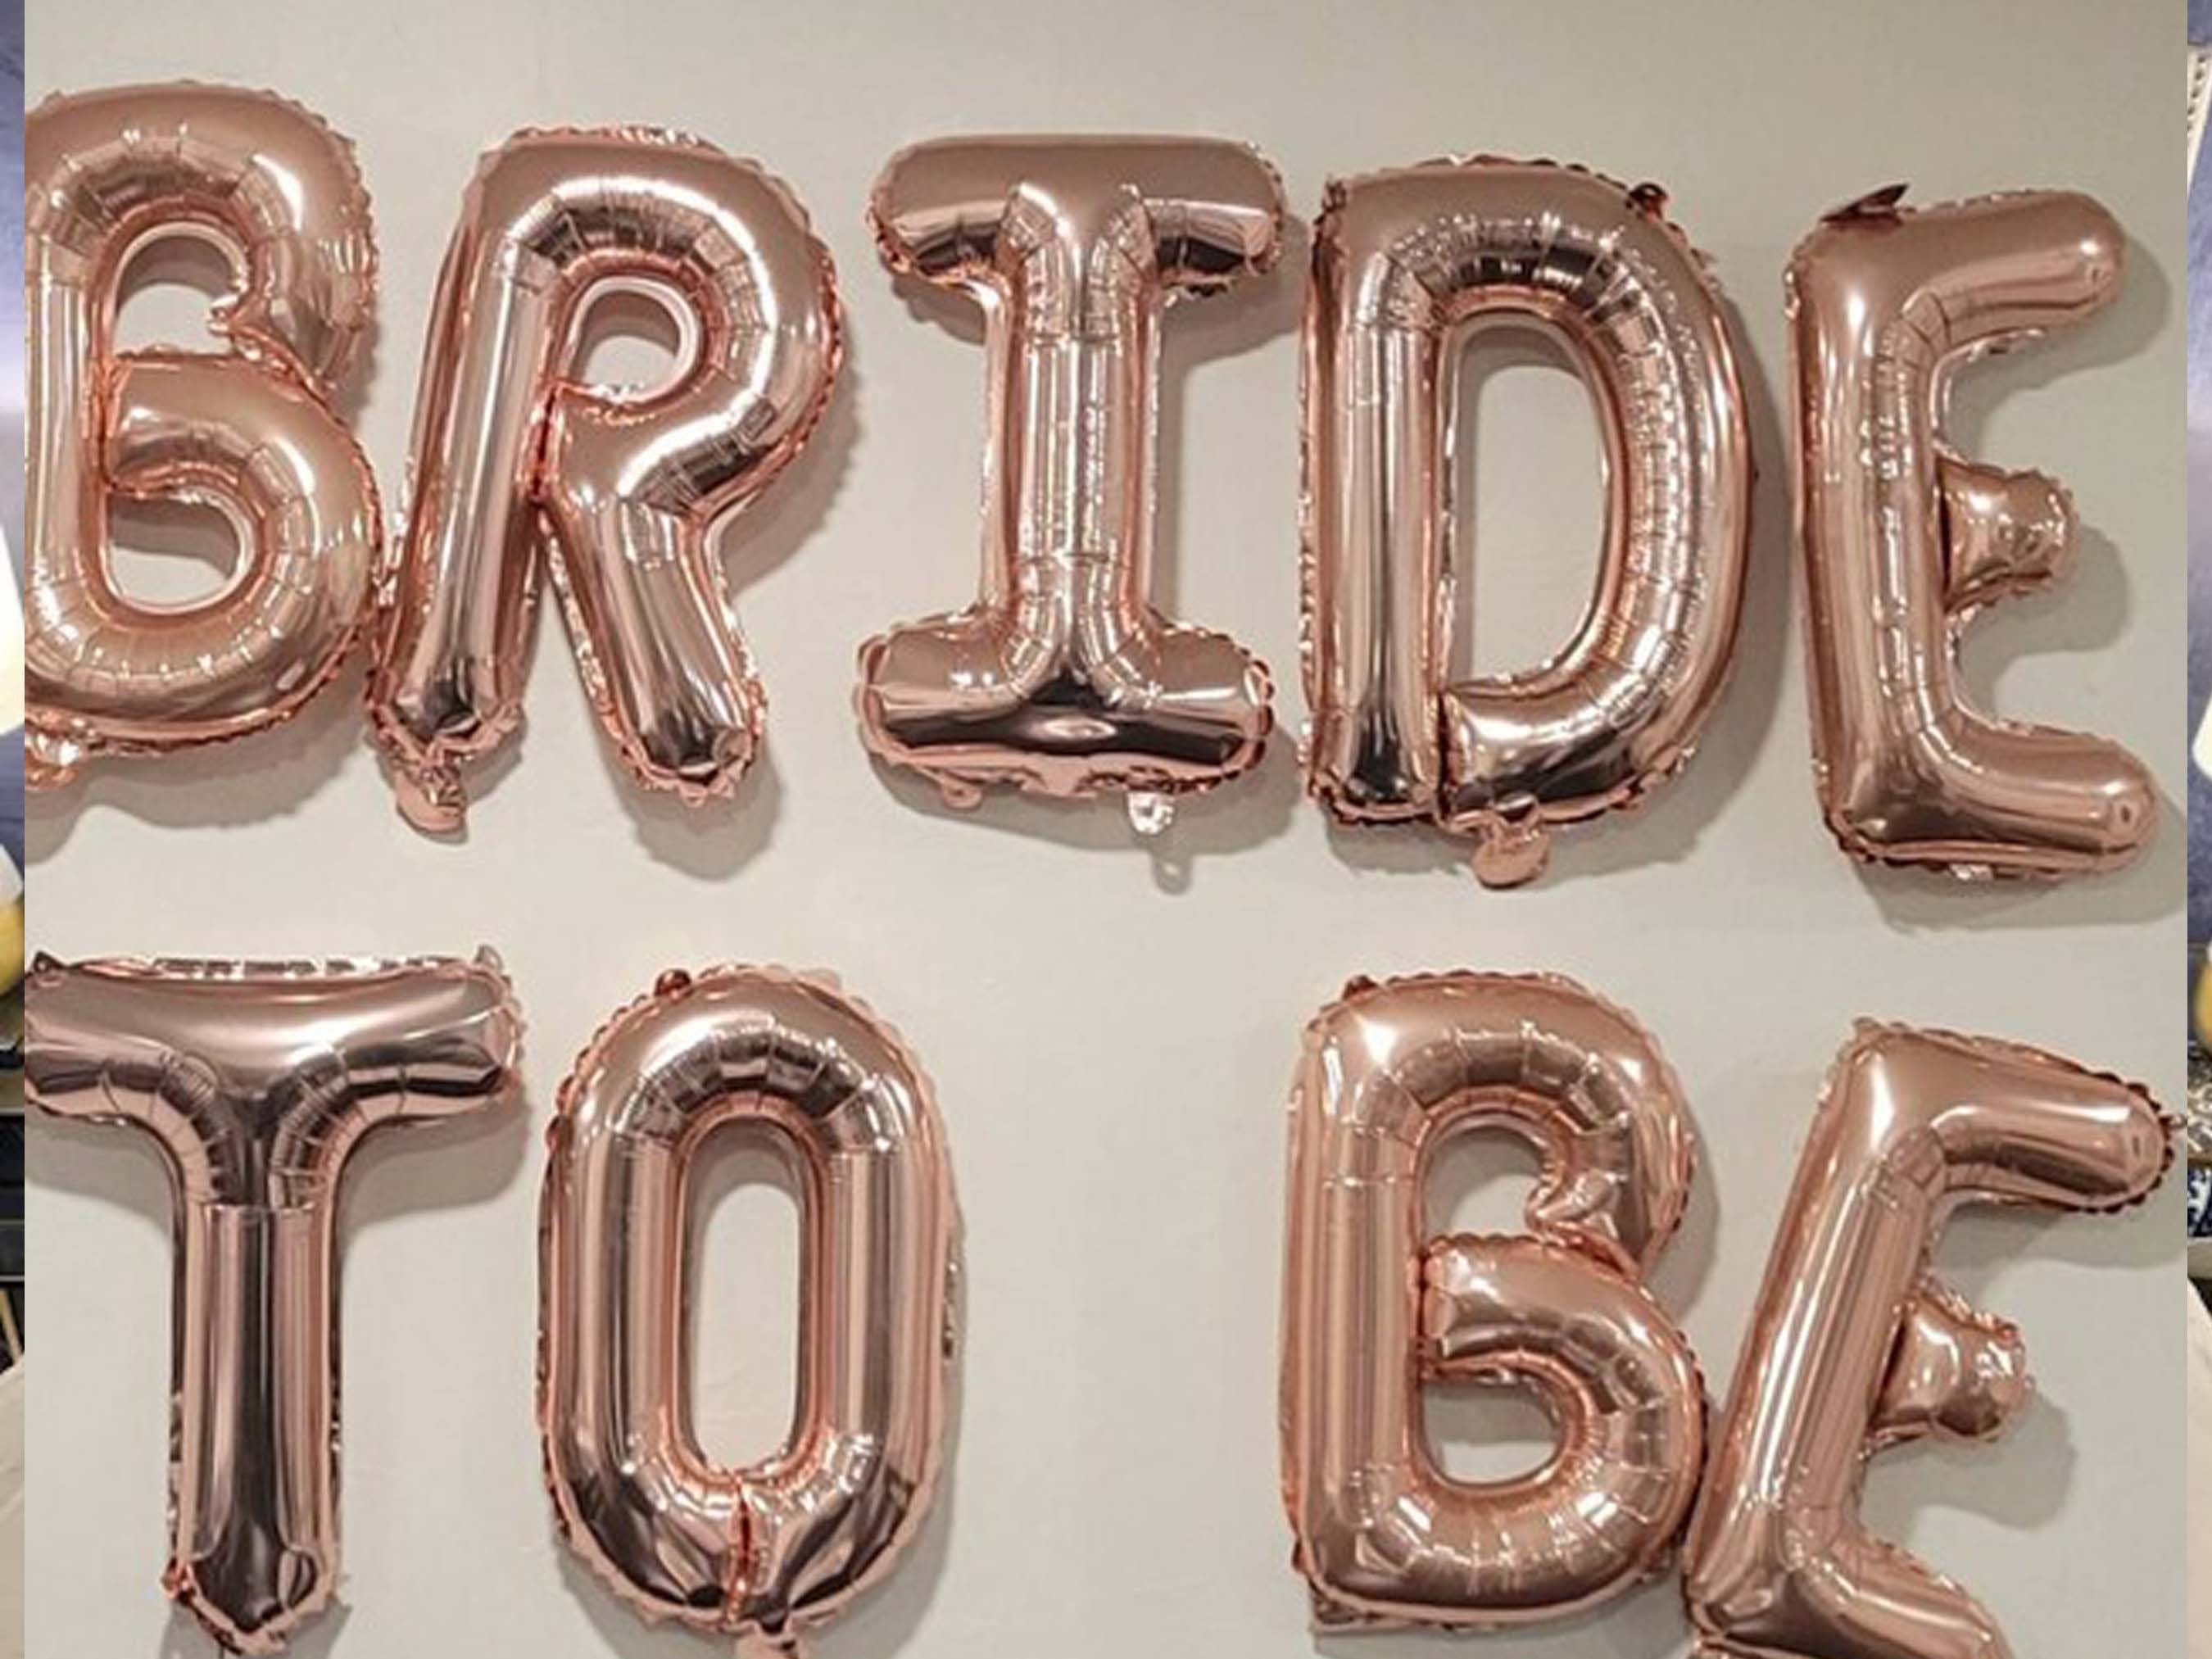 16" BRIDE TO BE Rose Gold / Gold / Silver Foil Balloon For Hens Party Engagement Hen Party Bridal Shower Kitchen Tea